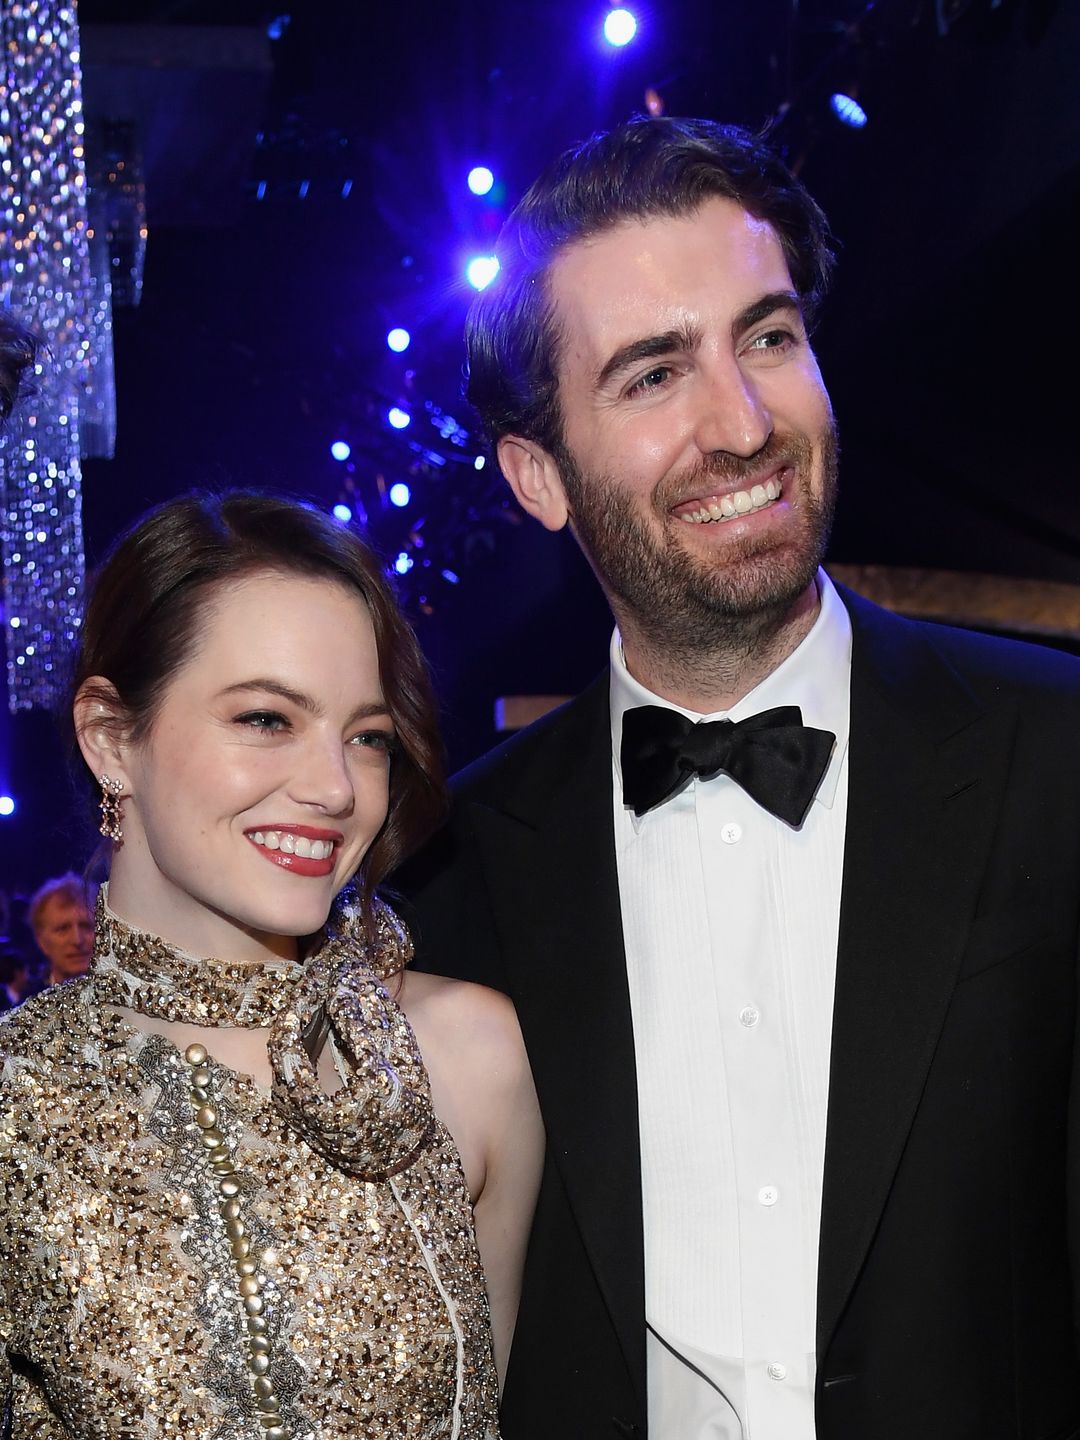 Emma Stone and Dave McCary at the 25th Annual Screen Actors Guild Awards at The Shrine Auditorium on January 27, 2019 in Los Angeles, California.